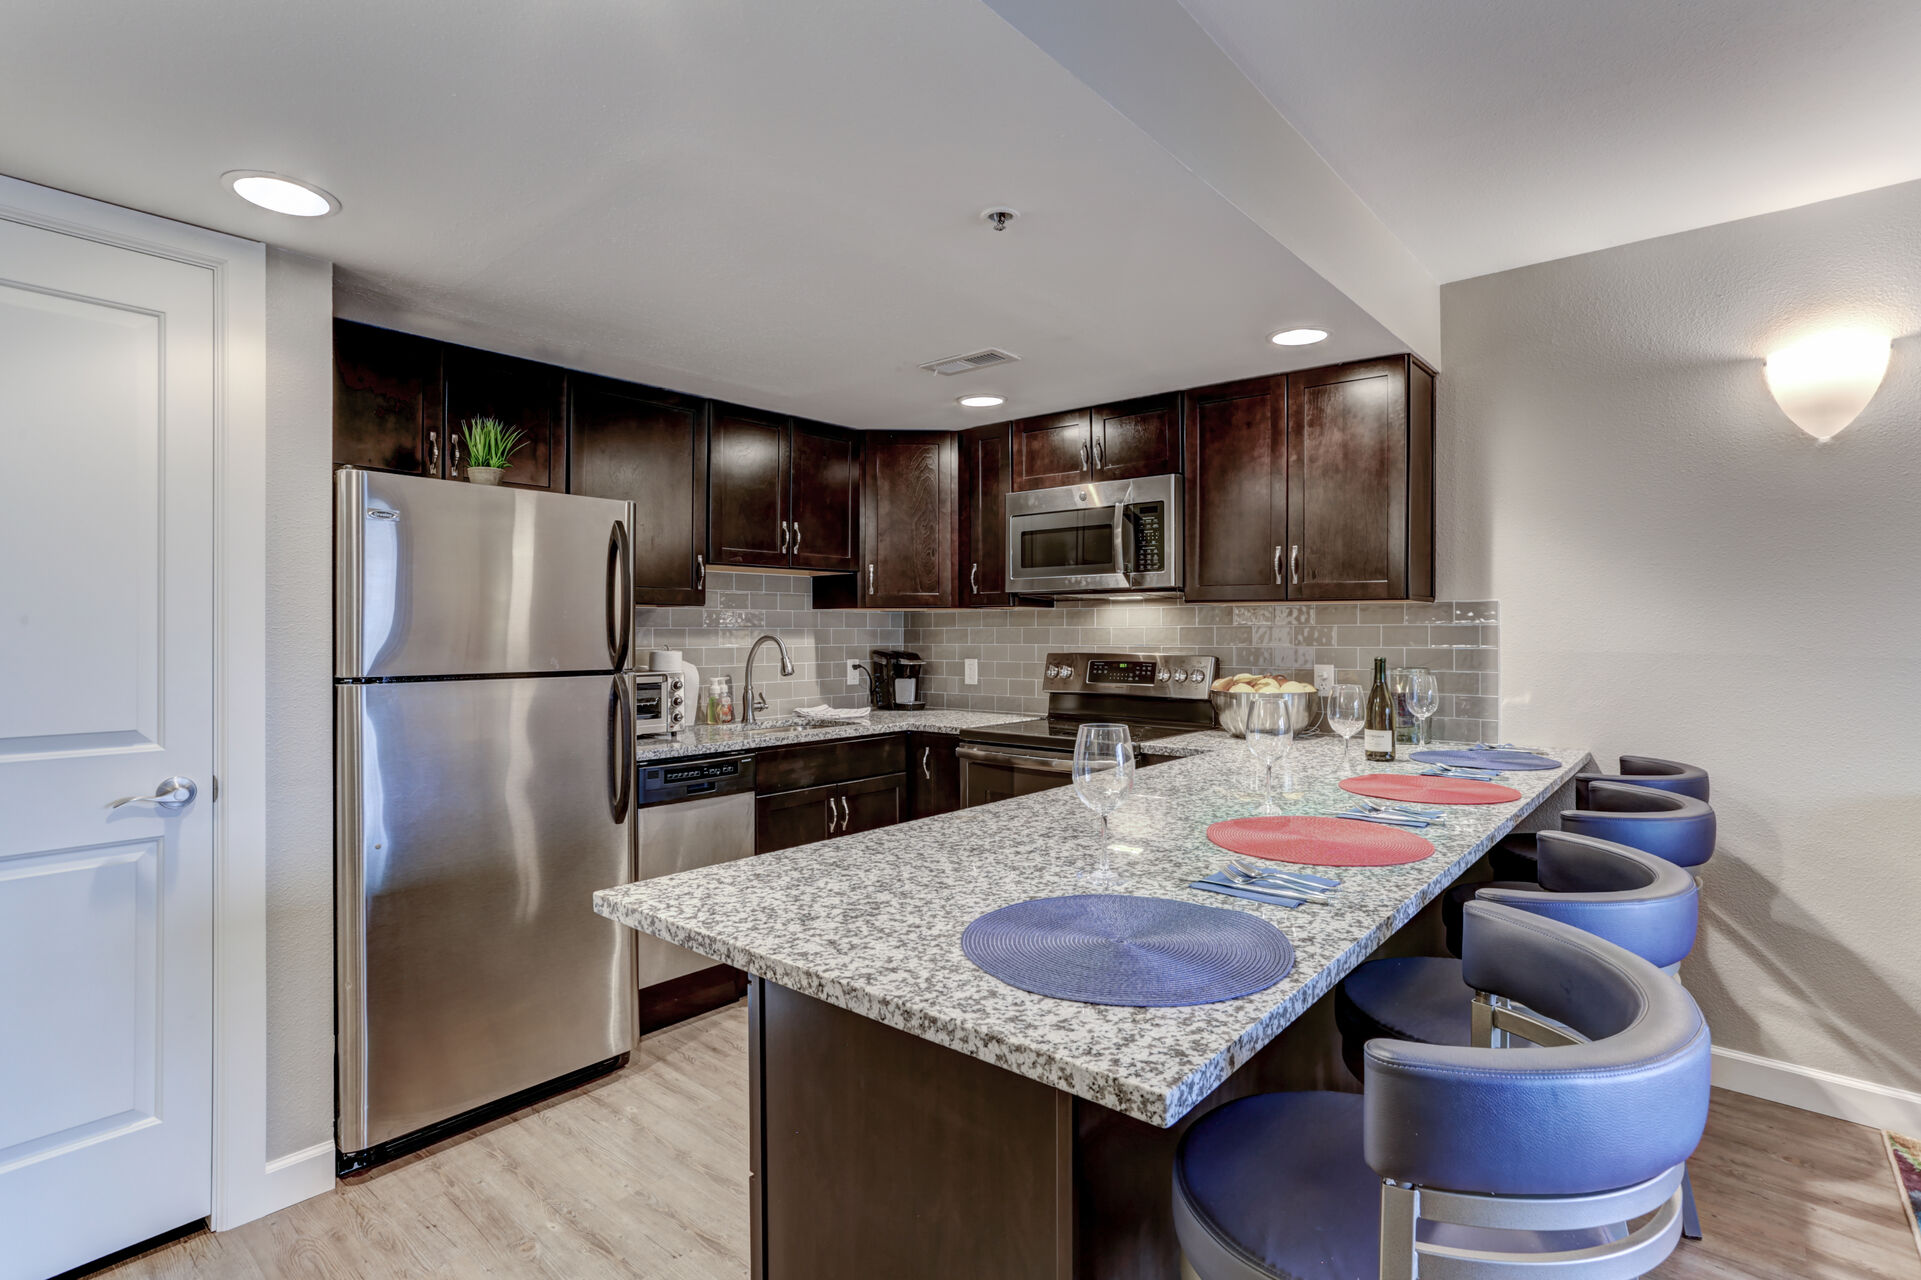 Fully Equipped, Newly Remodeled Kitchen with Stainless Steel Appliances, Bar Seating for 4